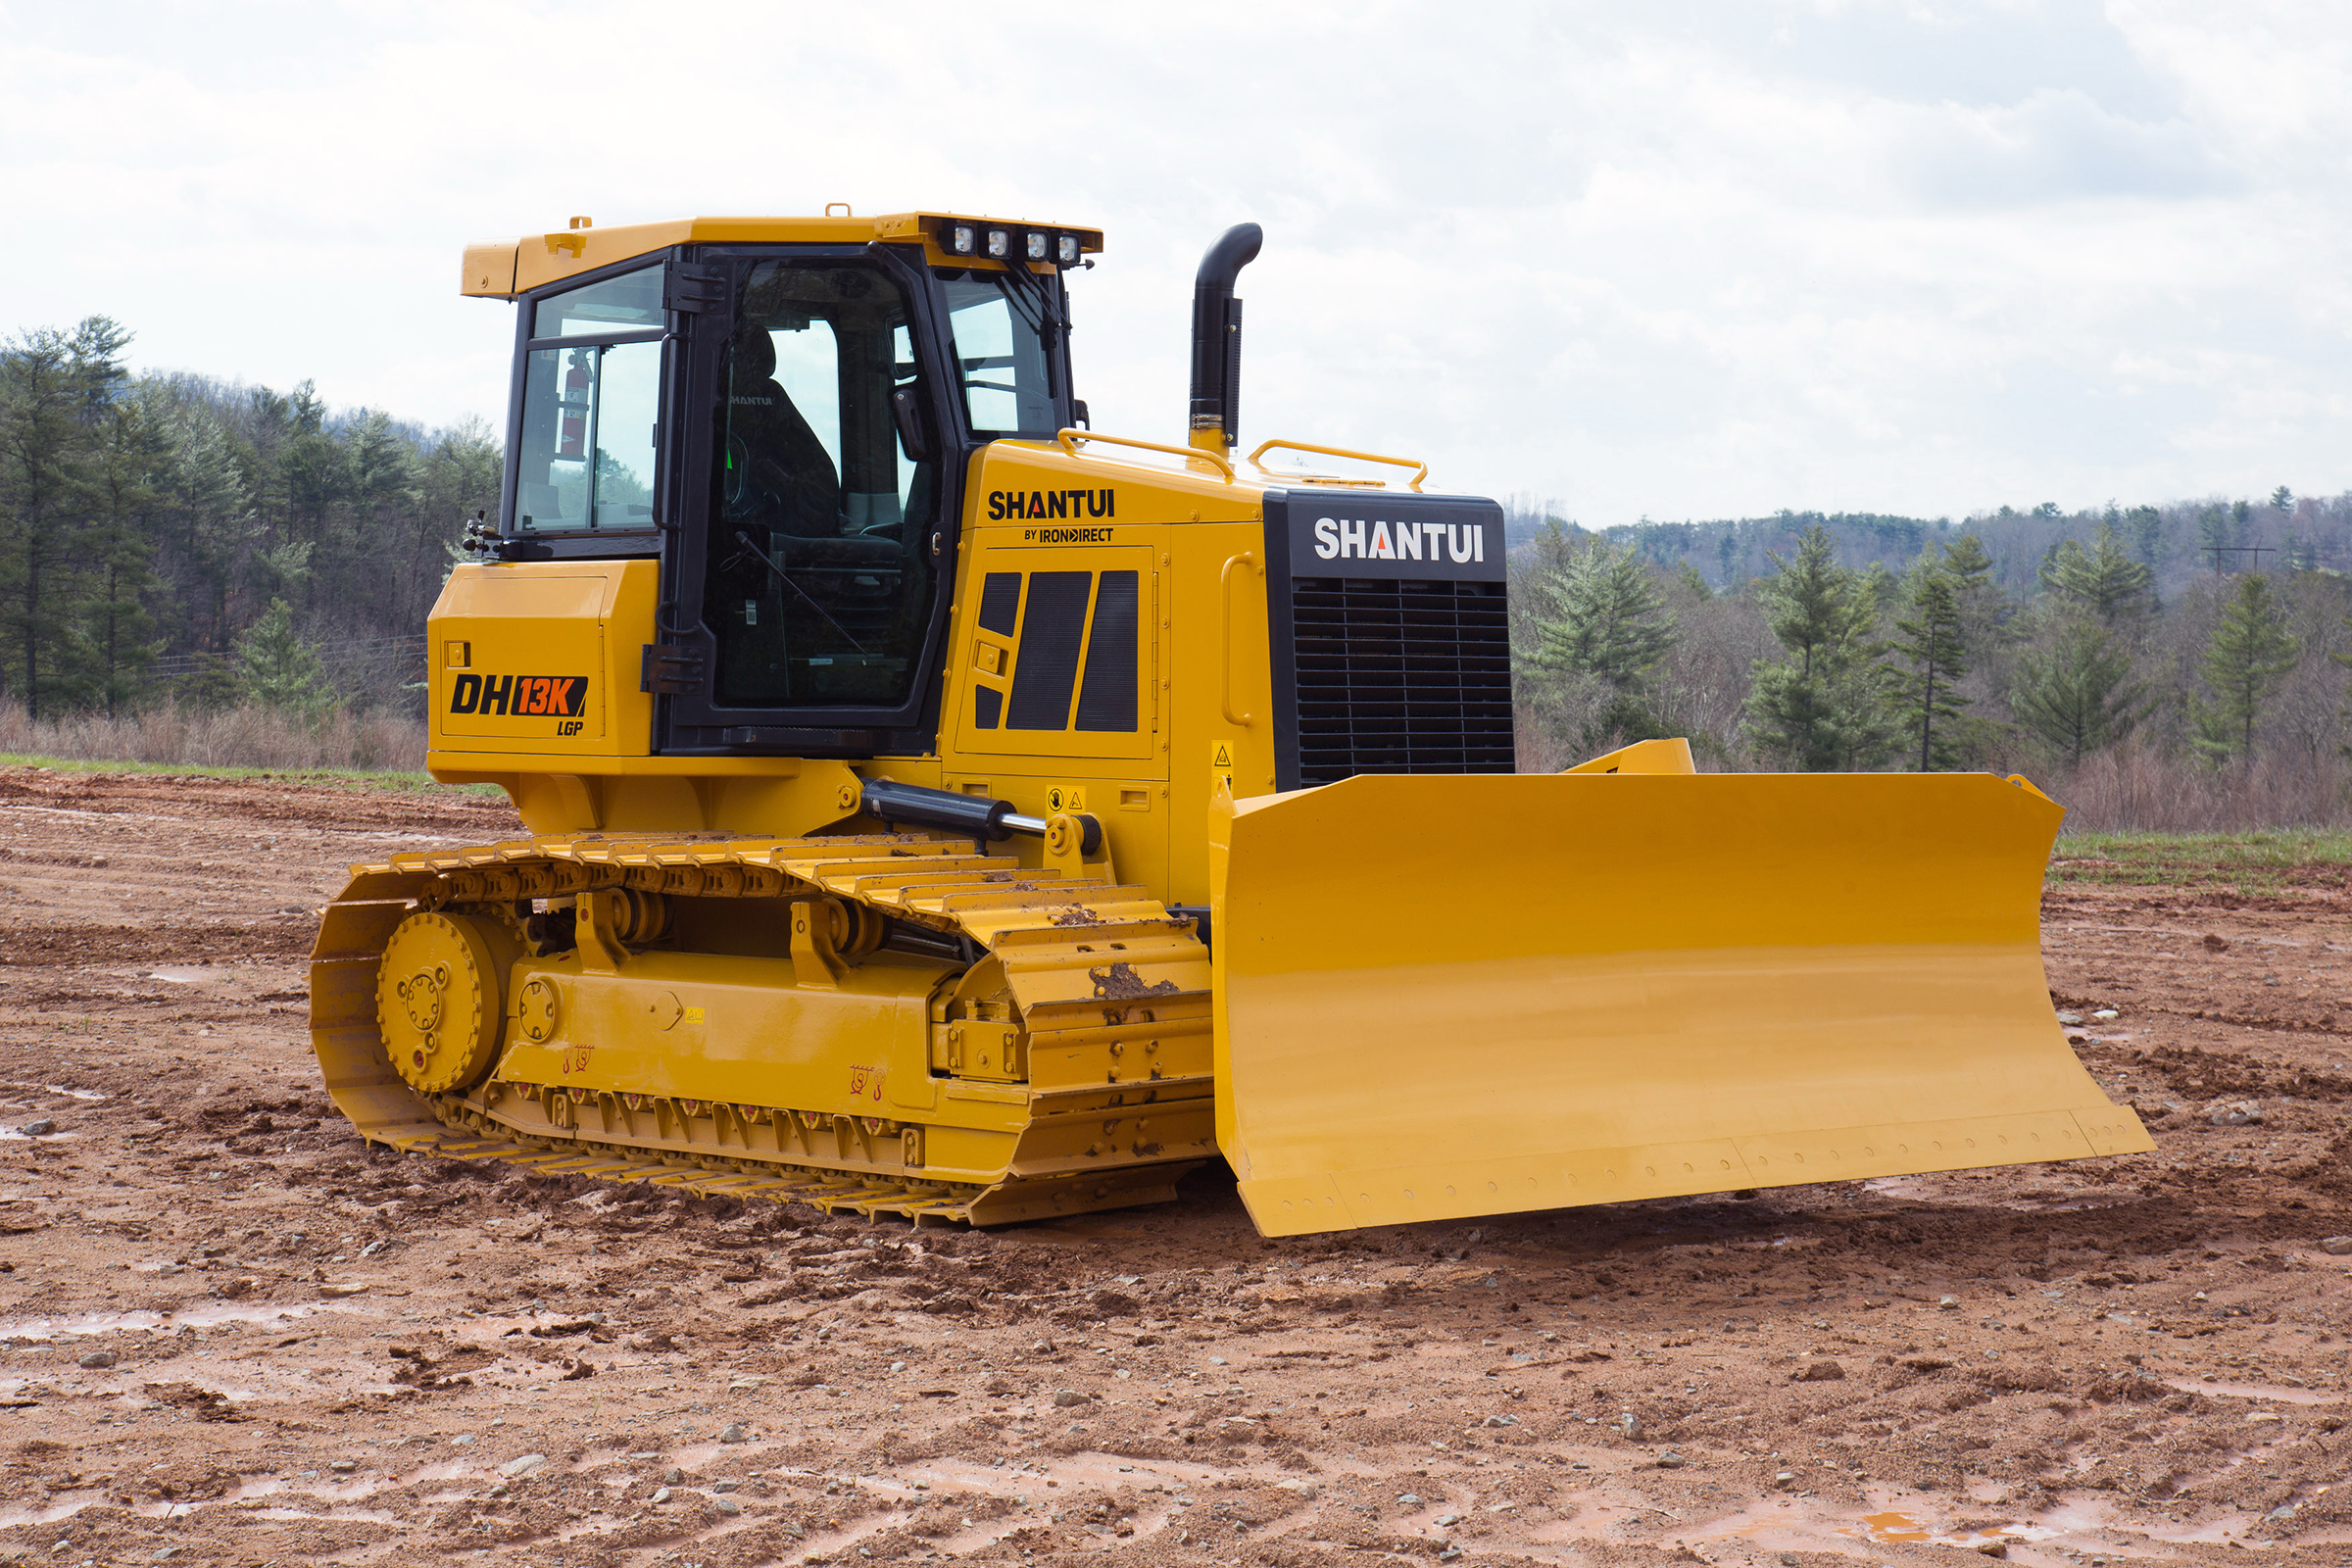 Shantui Hydrostatic Dozers Feature Superior Control - Forester Network